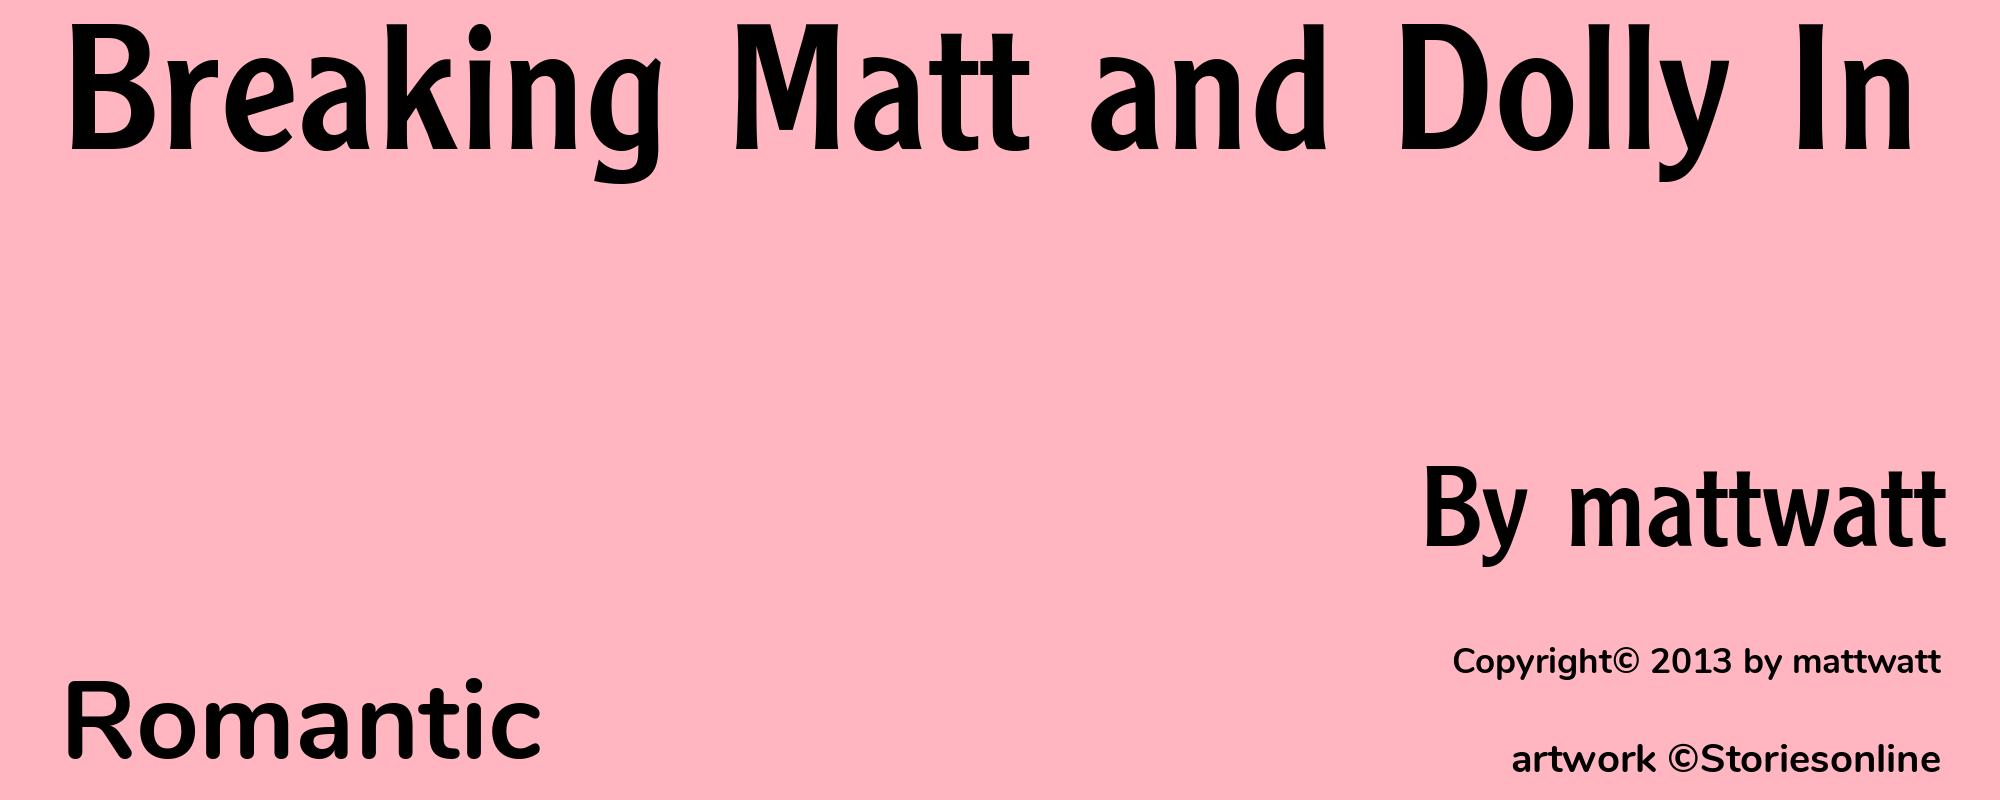 Breaking Matt and Dolly In - Cover